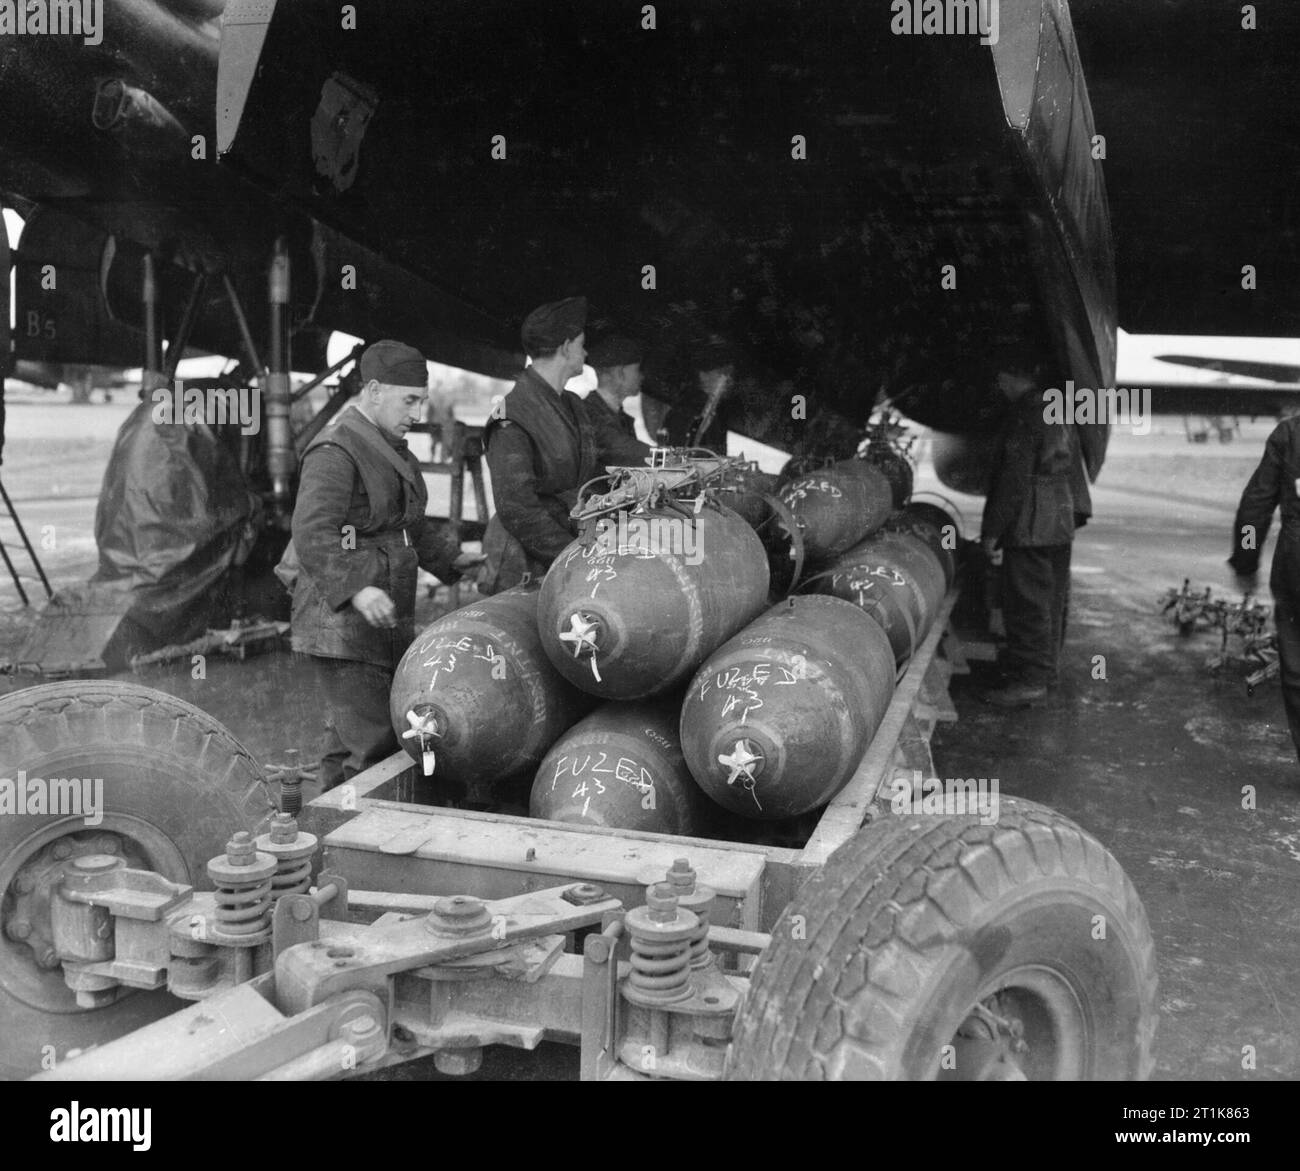 Royal Air Force Bomber Command, 1942-1945. Armourers prepare to load 1,000-lb MC bombs into the bomb-bay of an Avro Lancaster B Mark III of No. 106 Squadron RAF at Metheringham, Lincolnshire, for a major night raid on Frankfurt, Germany. The chalk markings on the bombs indicate that each has been fuzed with a No. 43 air-armed nose pistol, the safety pins of which can be seen hanging from the nose rotor. These will be removed shortly before the crew board the aircraft. Stock Photo